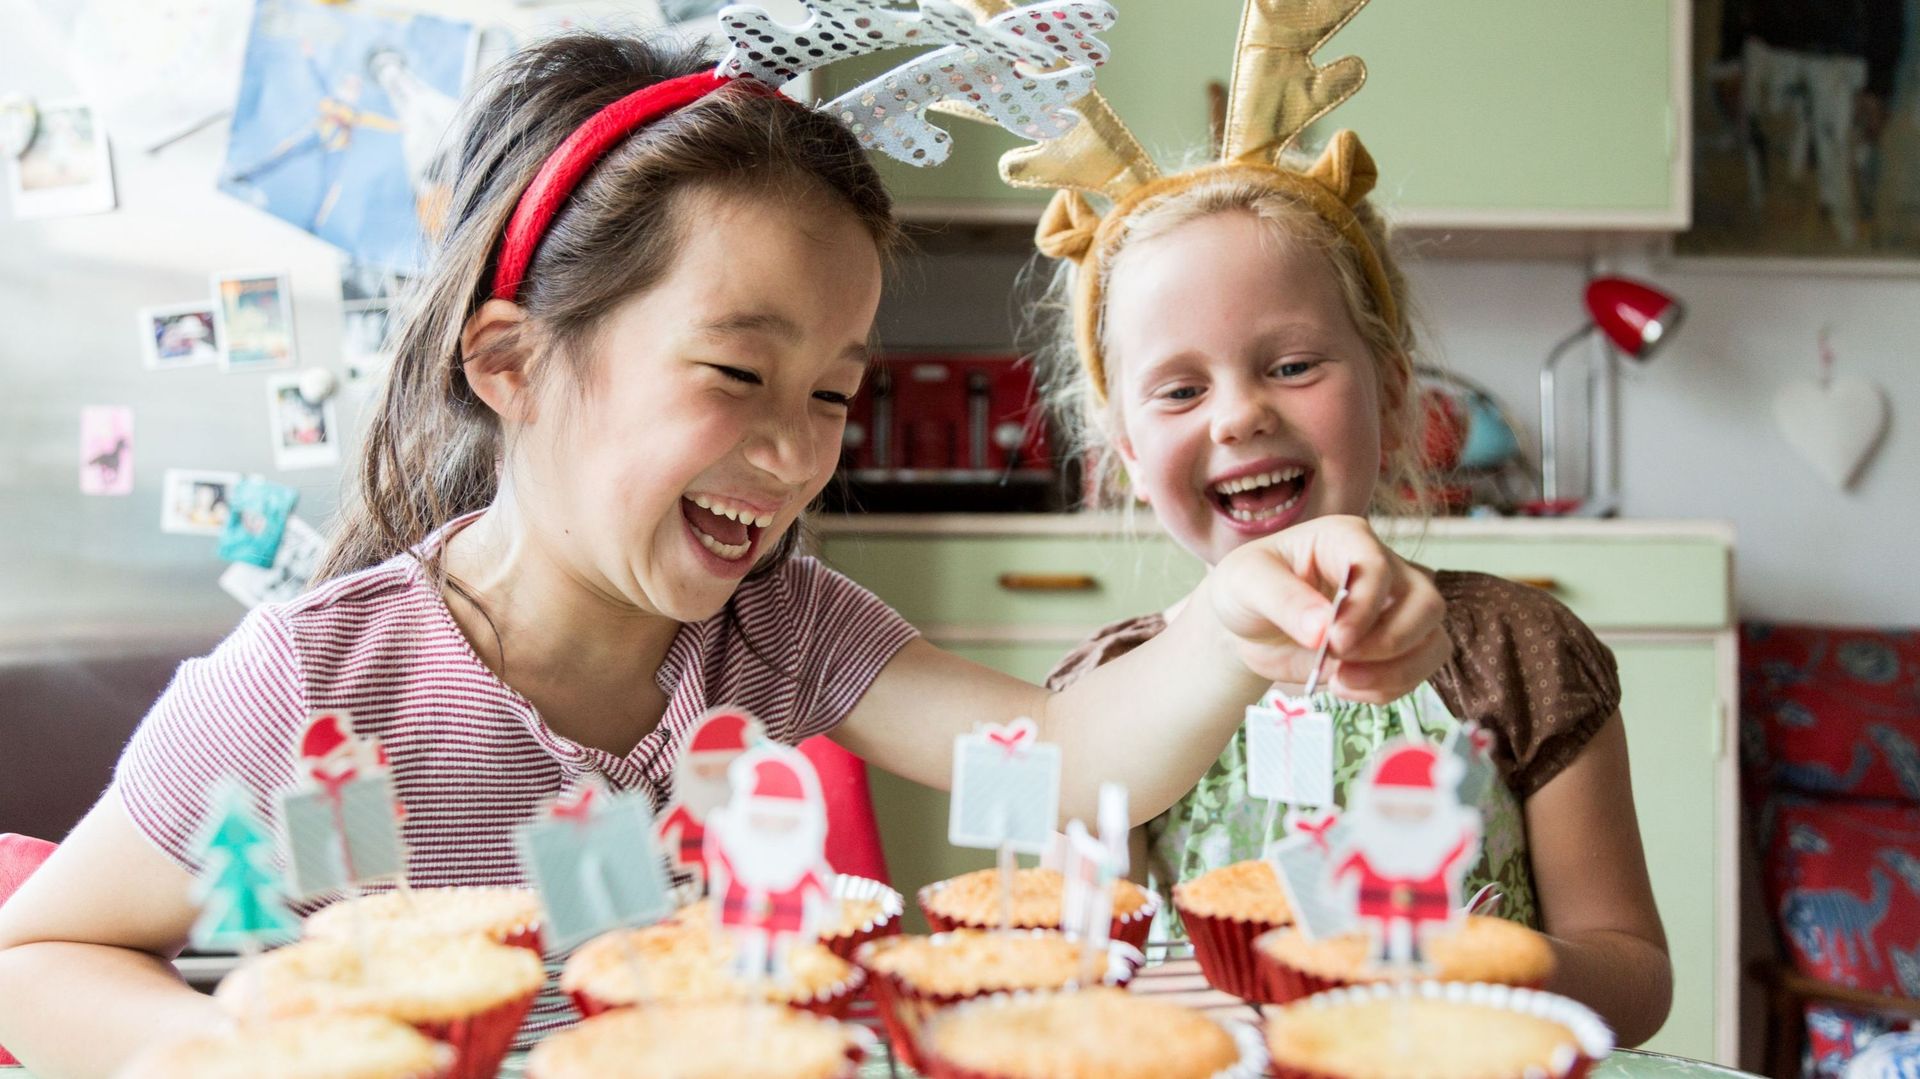 Girls laugh whilst decorating Christmas cupcakes